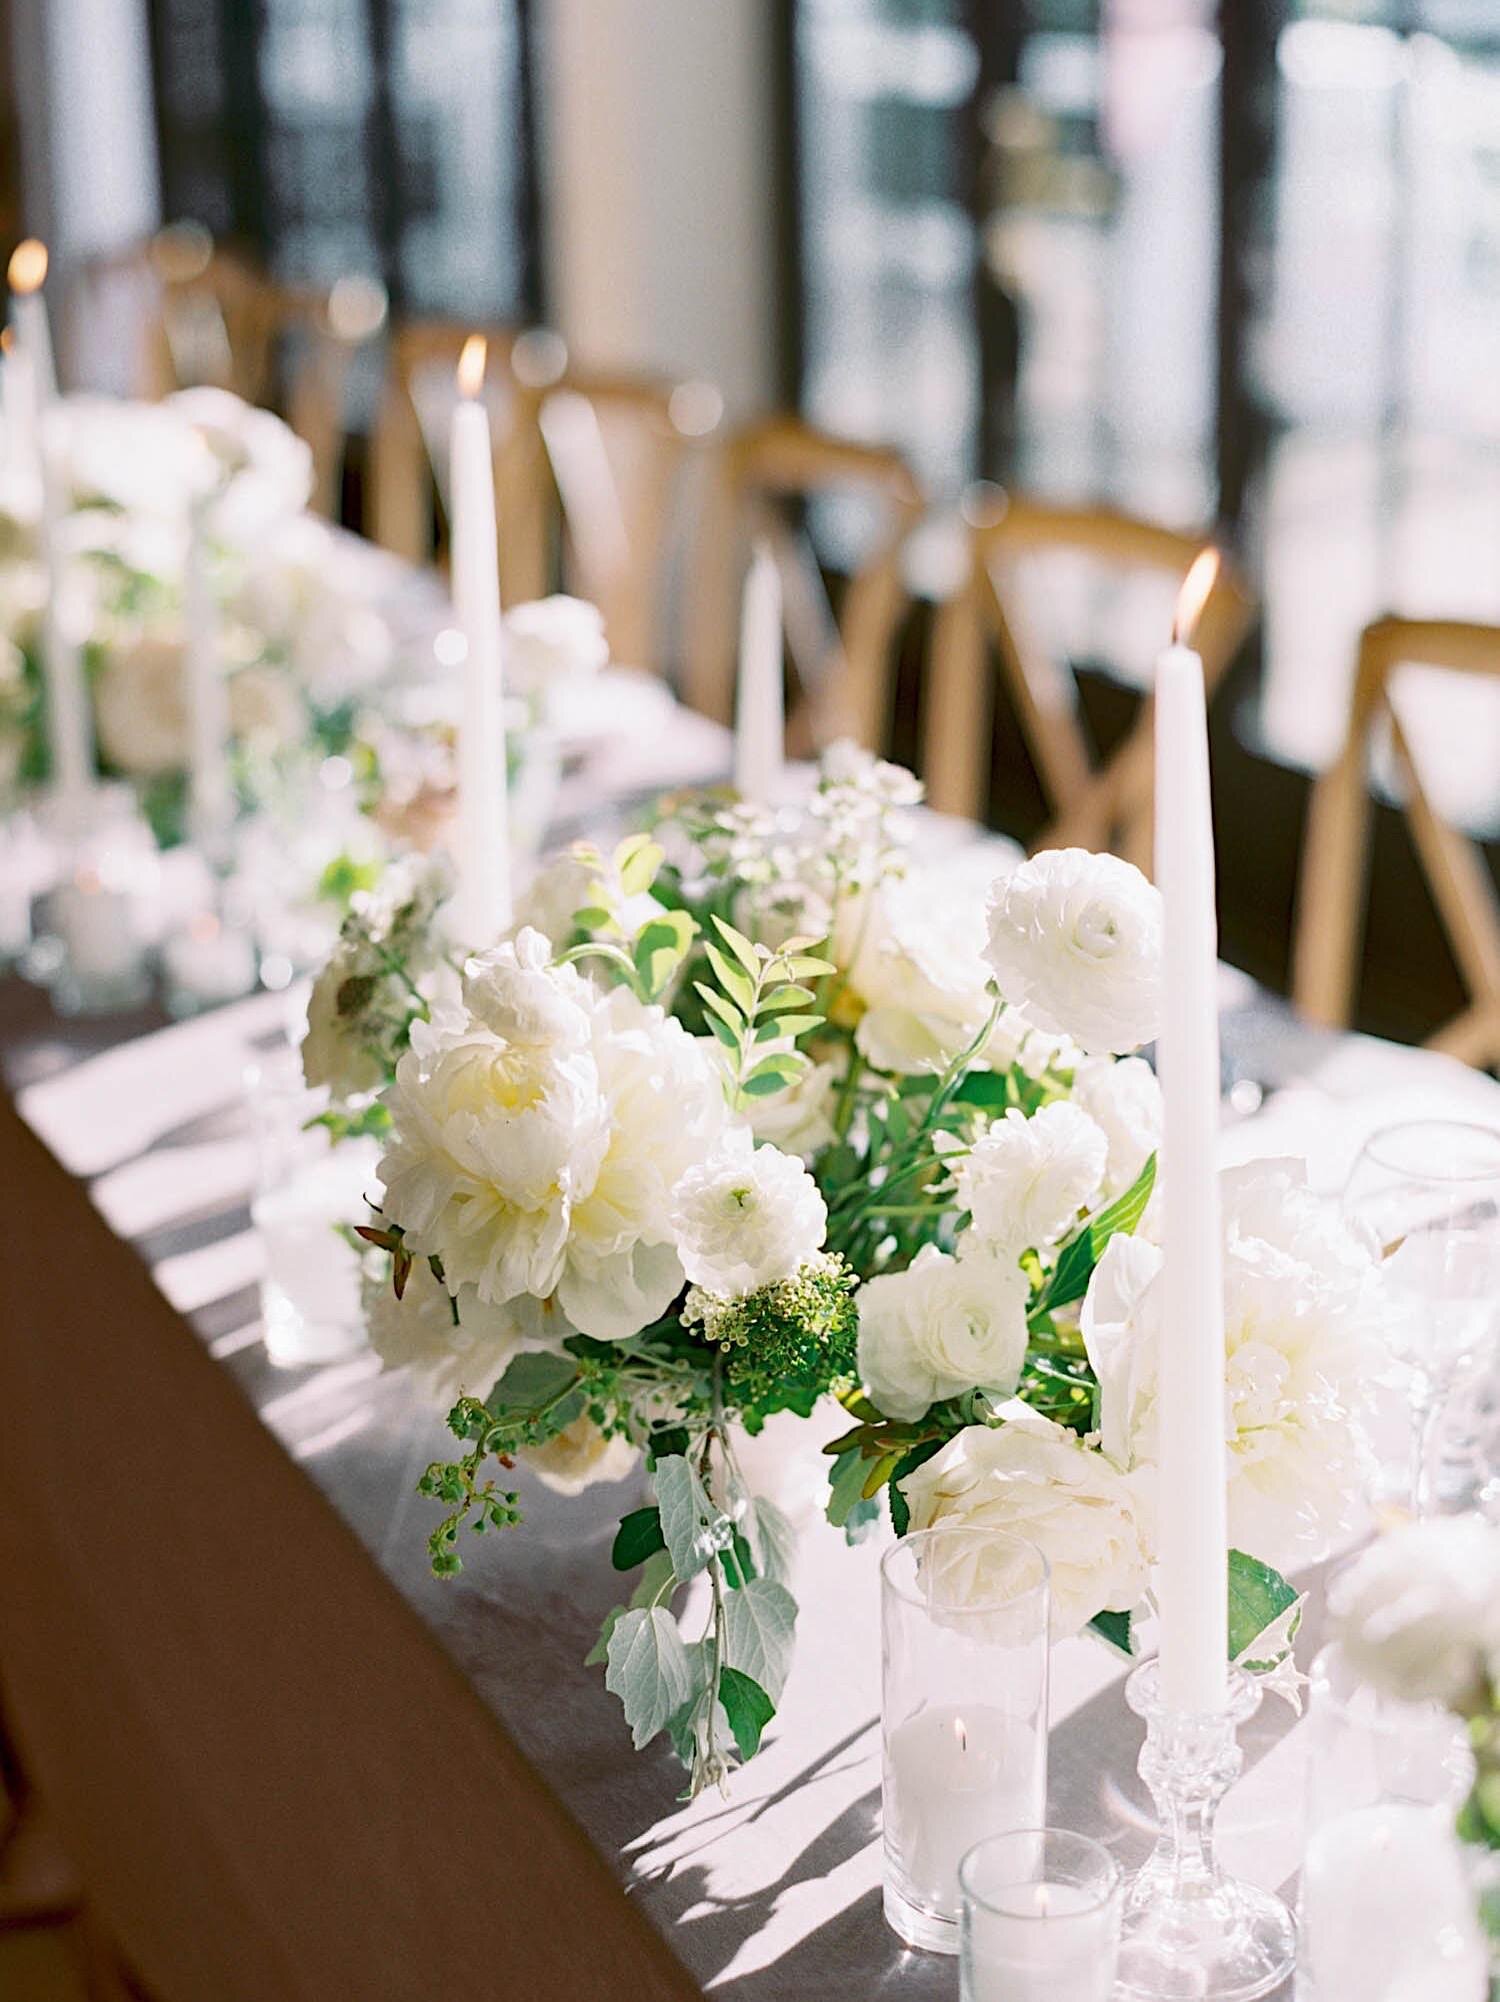 White and green centerpieces with white tapers at a Roche Harbor wedding reception